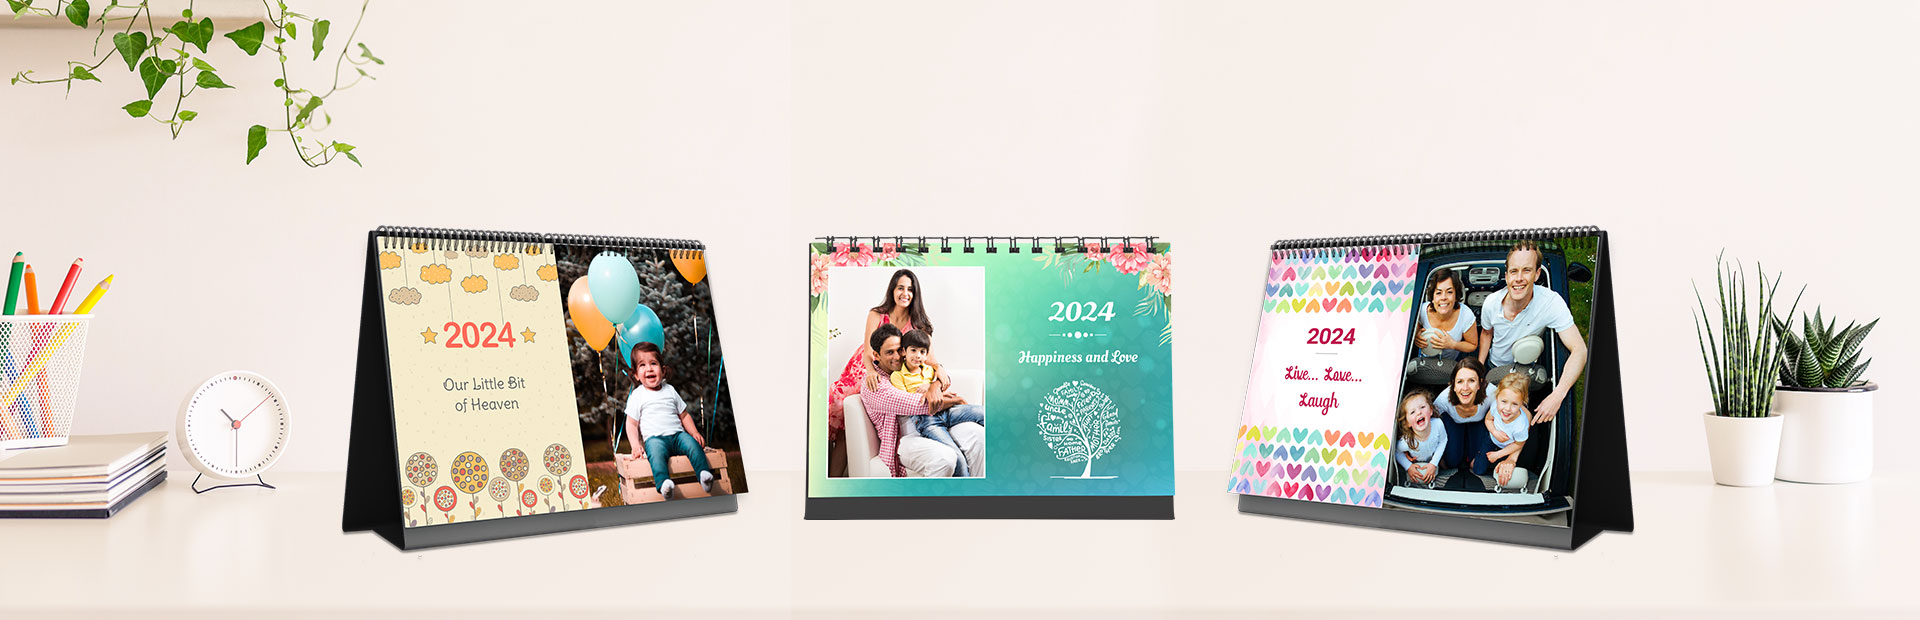 Personalized Photo Calendars Printing Online - Picsy